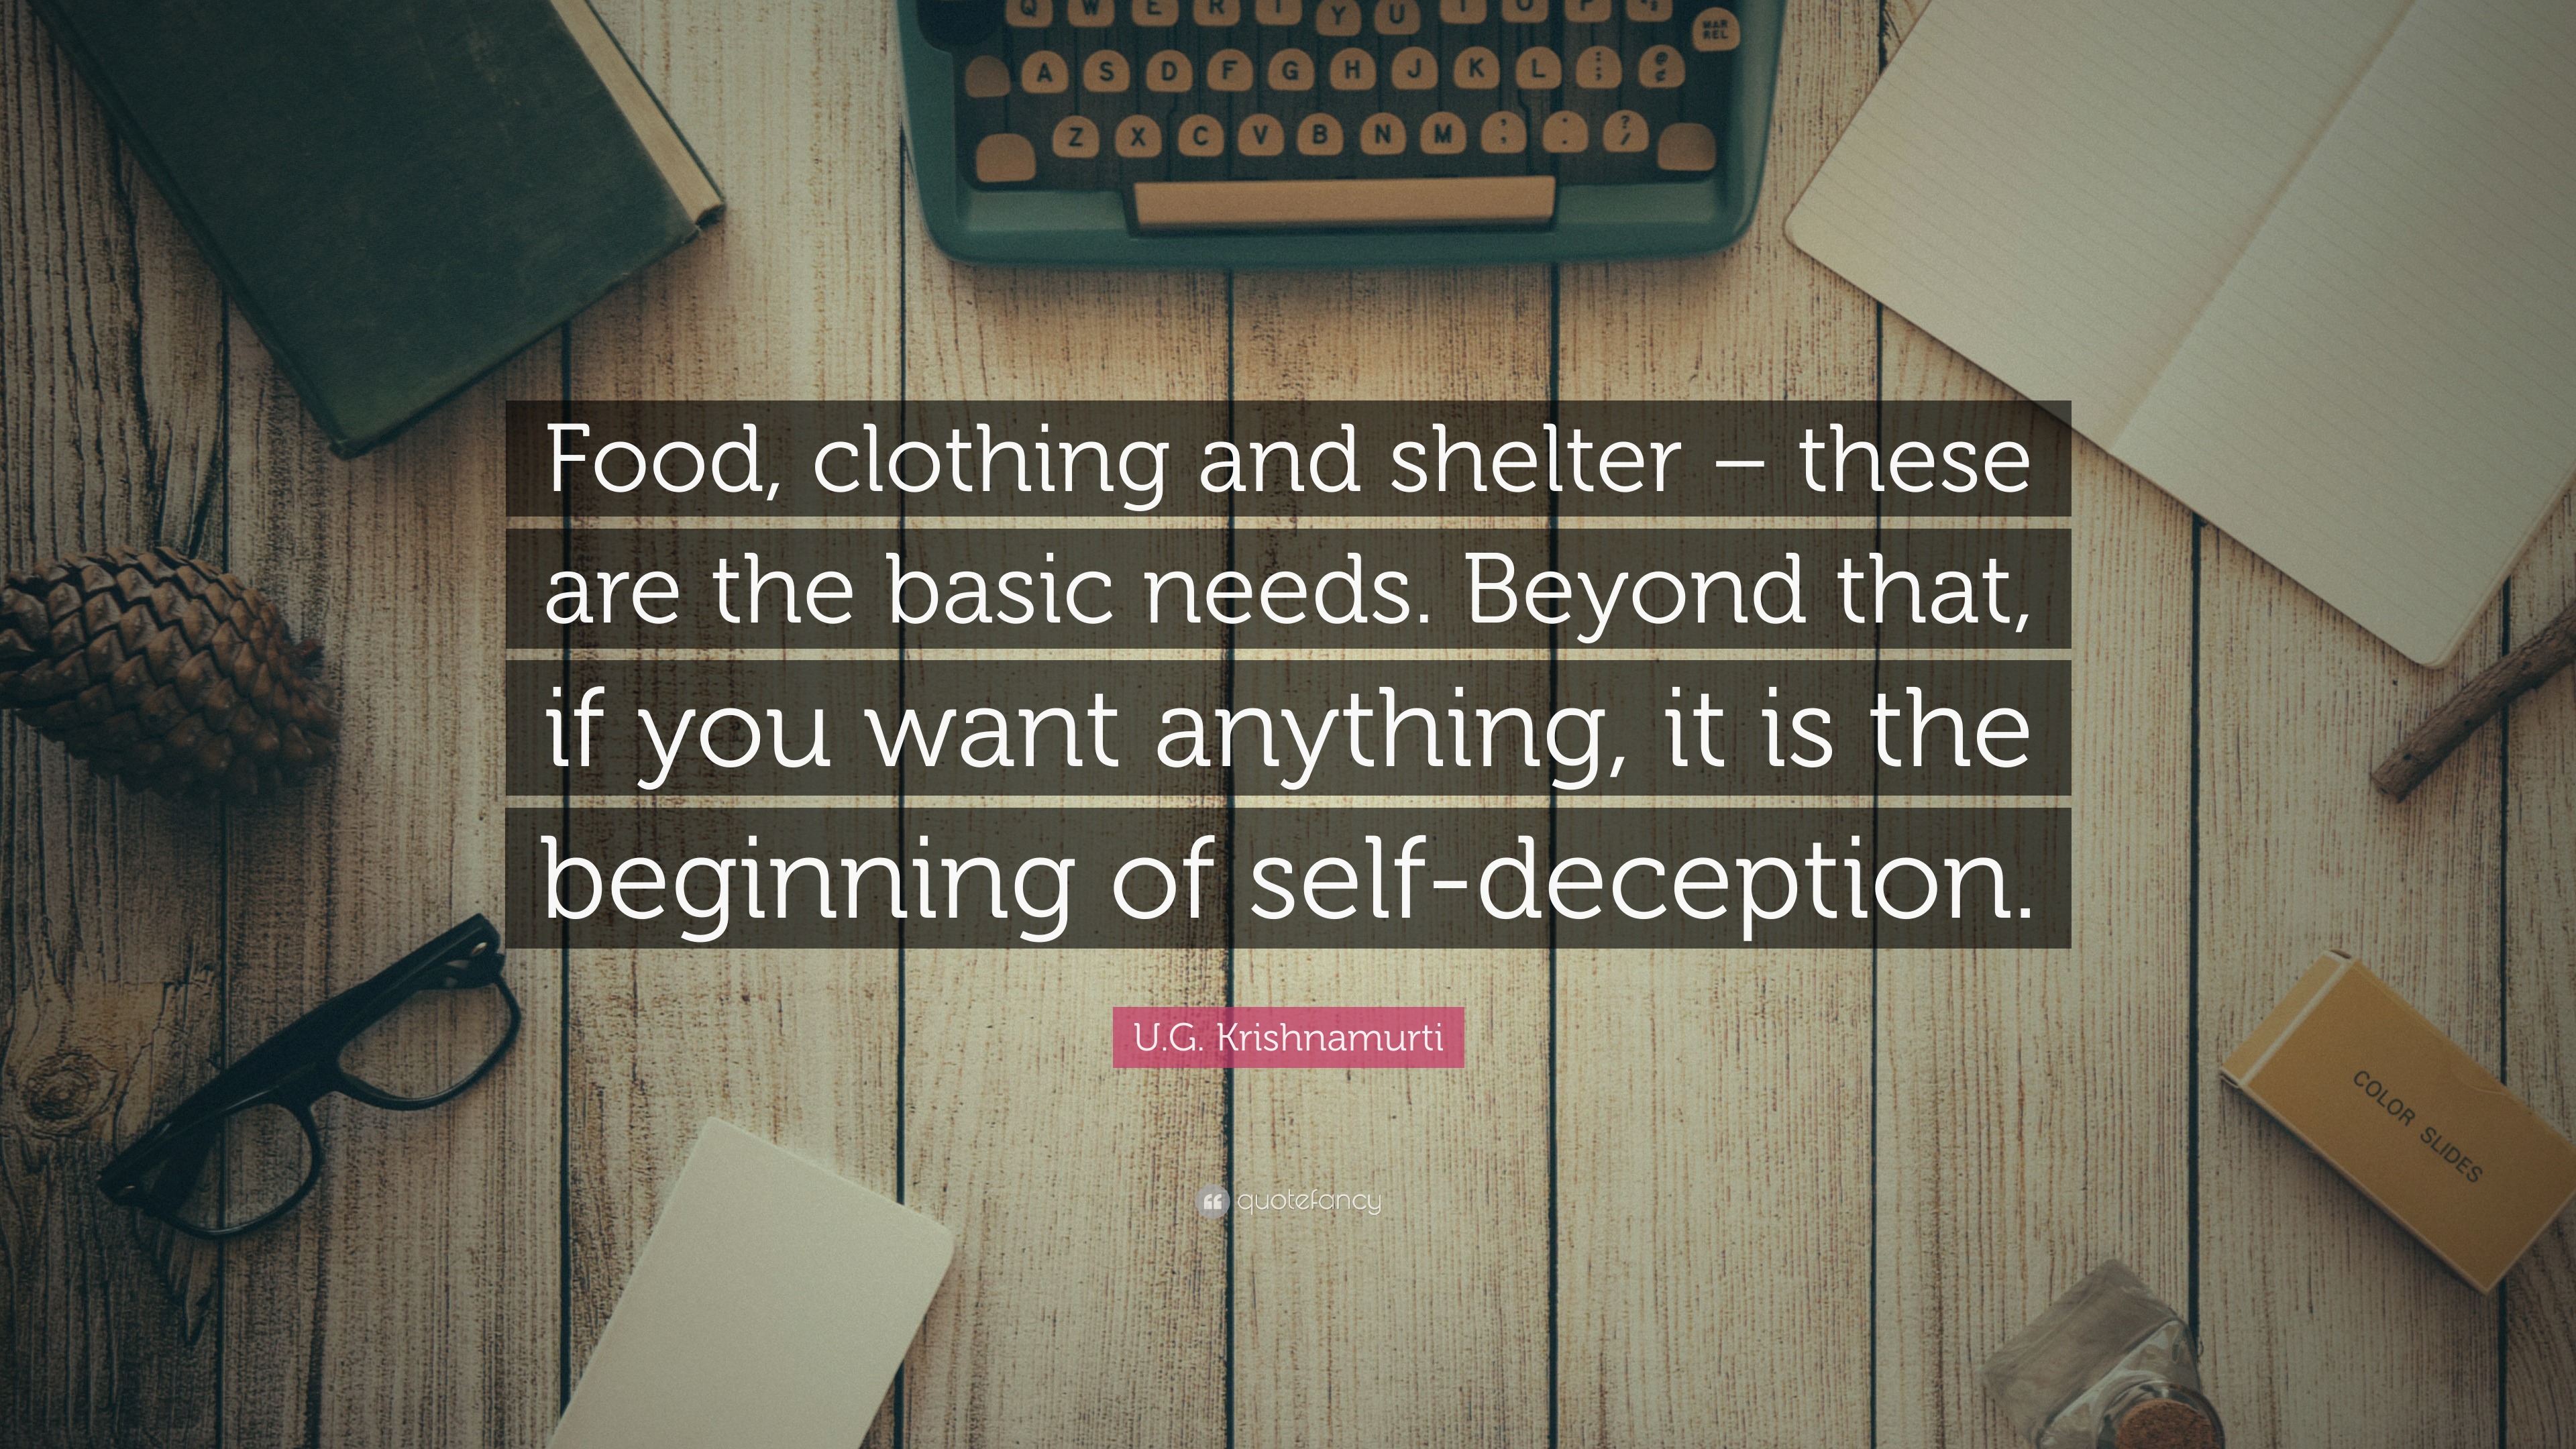 U.G. Krishnamurti Quote: “Food, clothing and shelter – these are the basic  needs. Beyond that, if you want anything, it is the beginning of self-d”